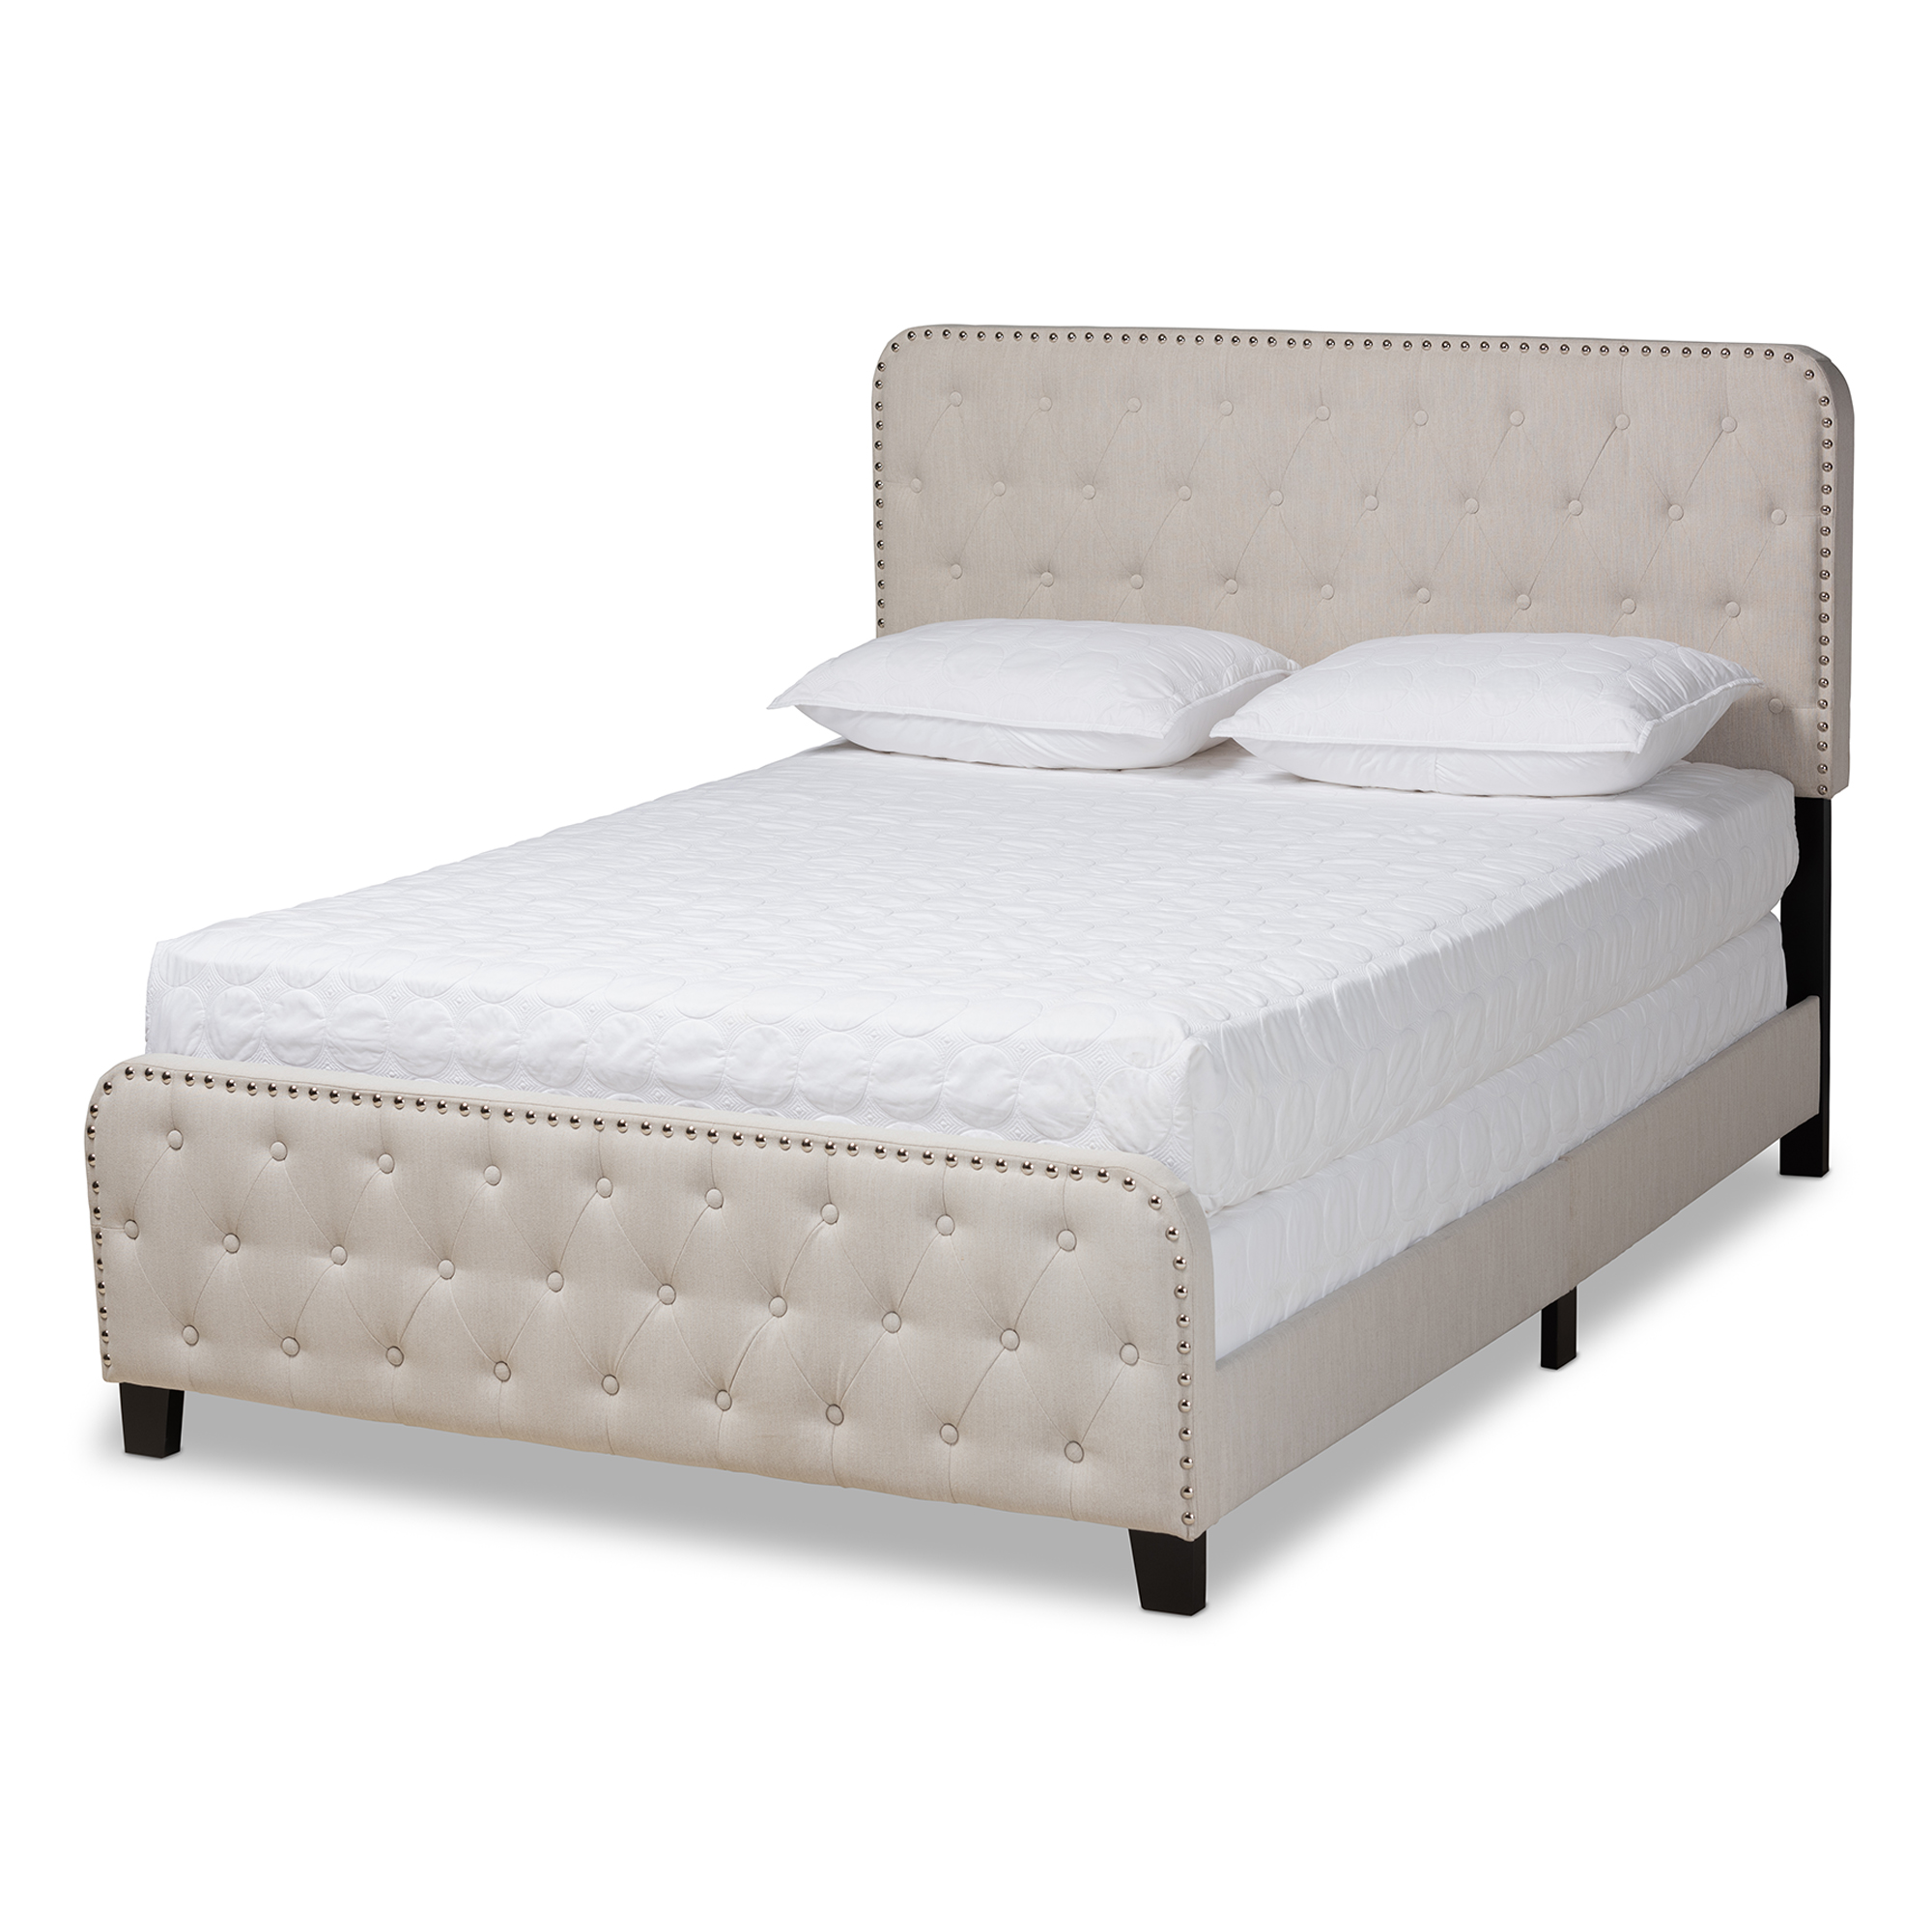 King Size Bed Frame, Sears Bed Frames And Headboards